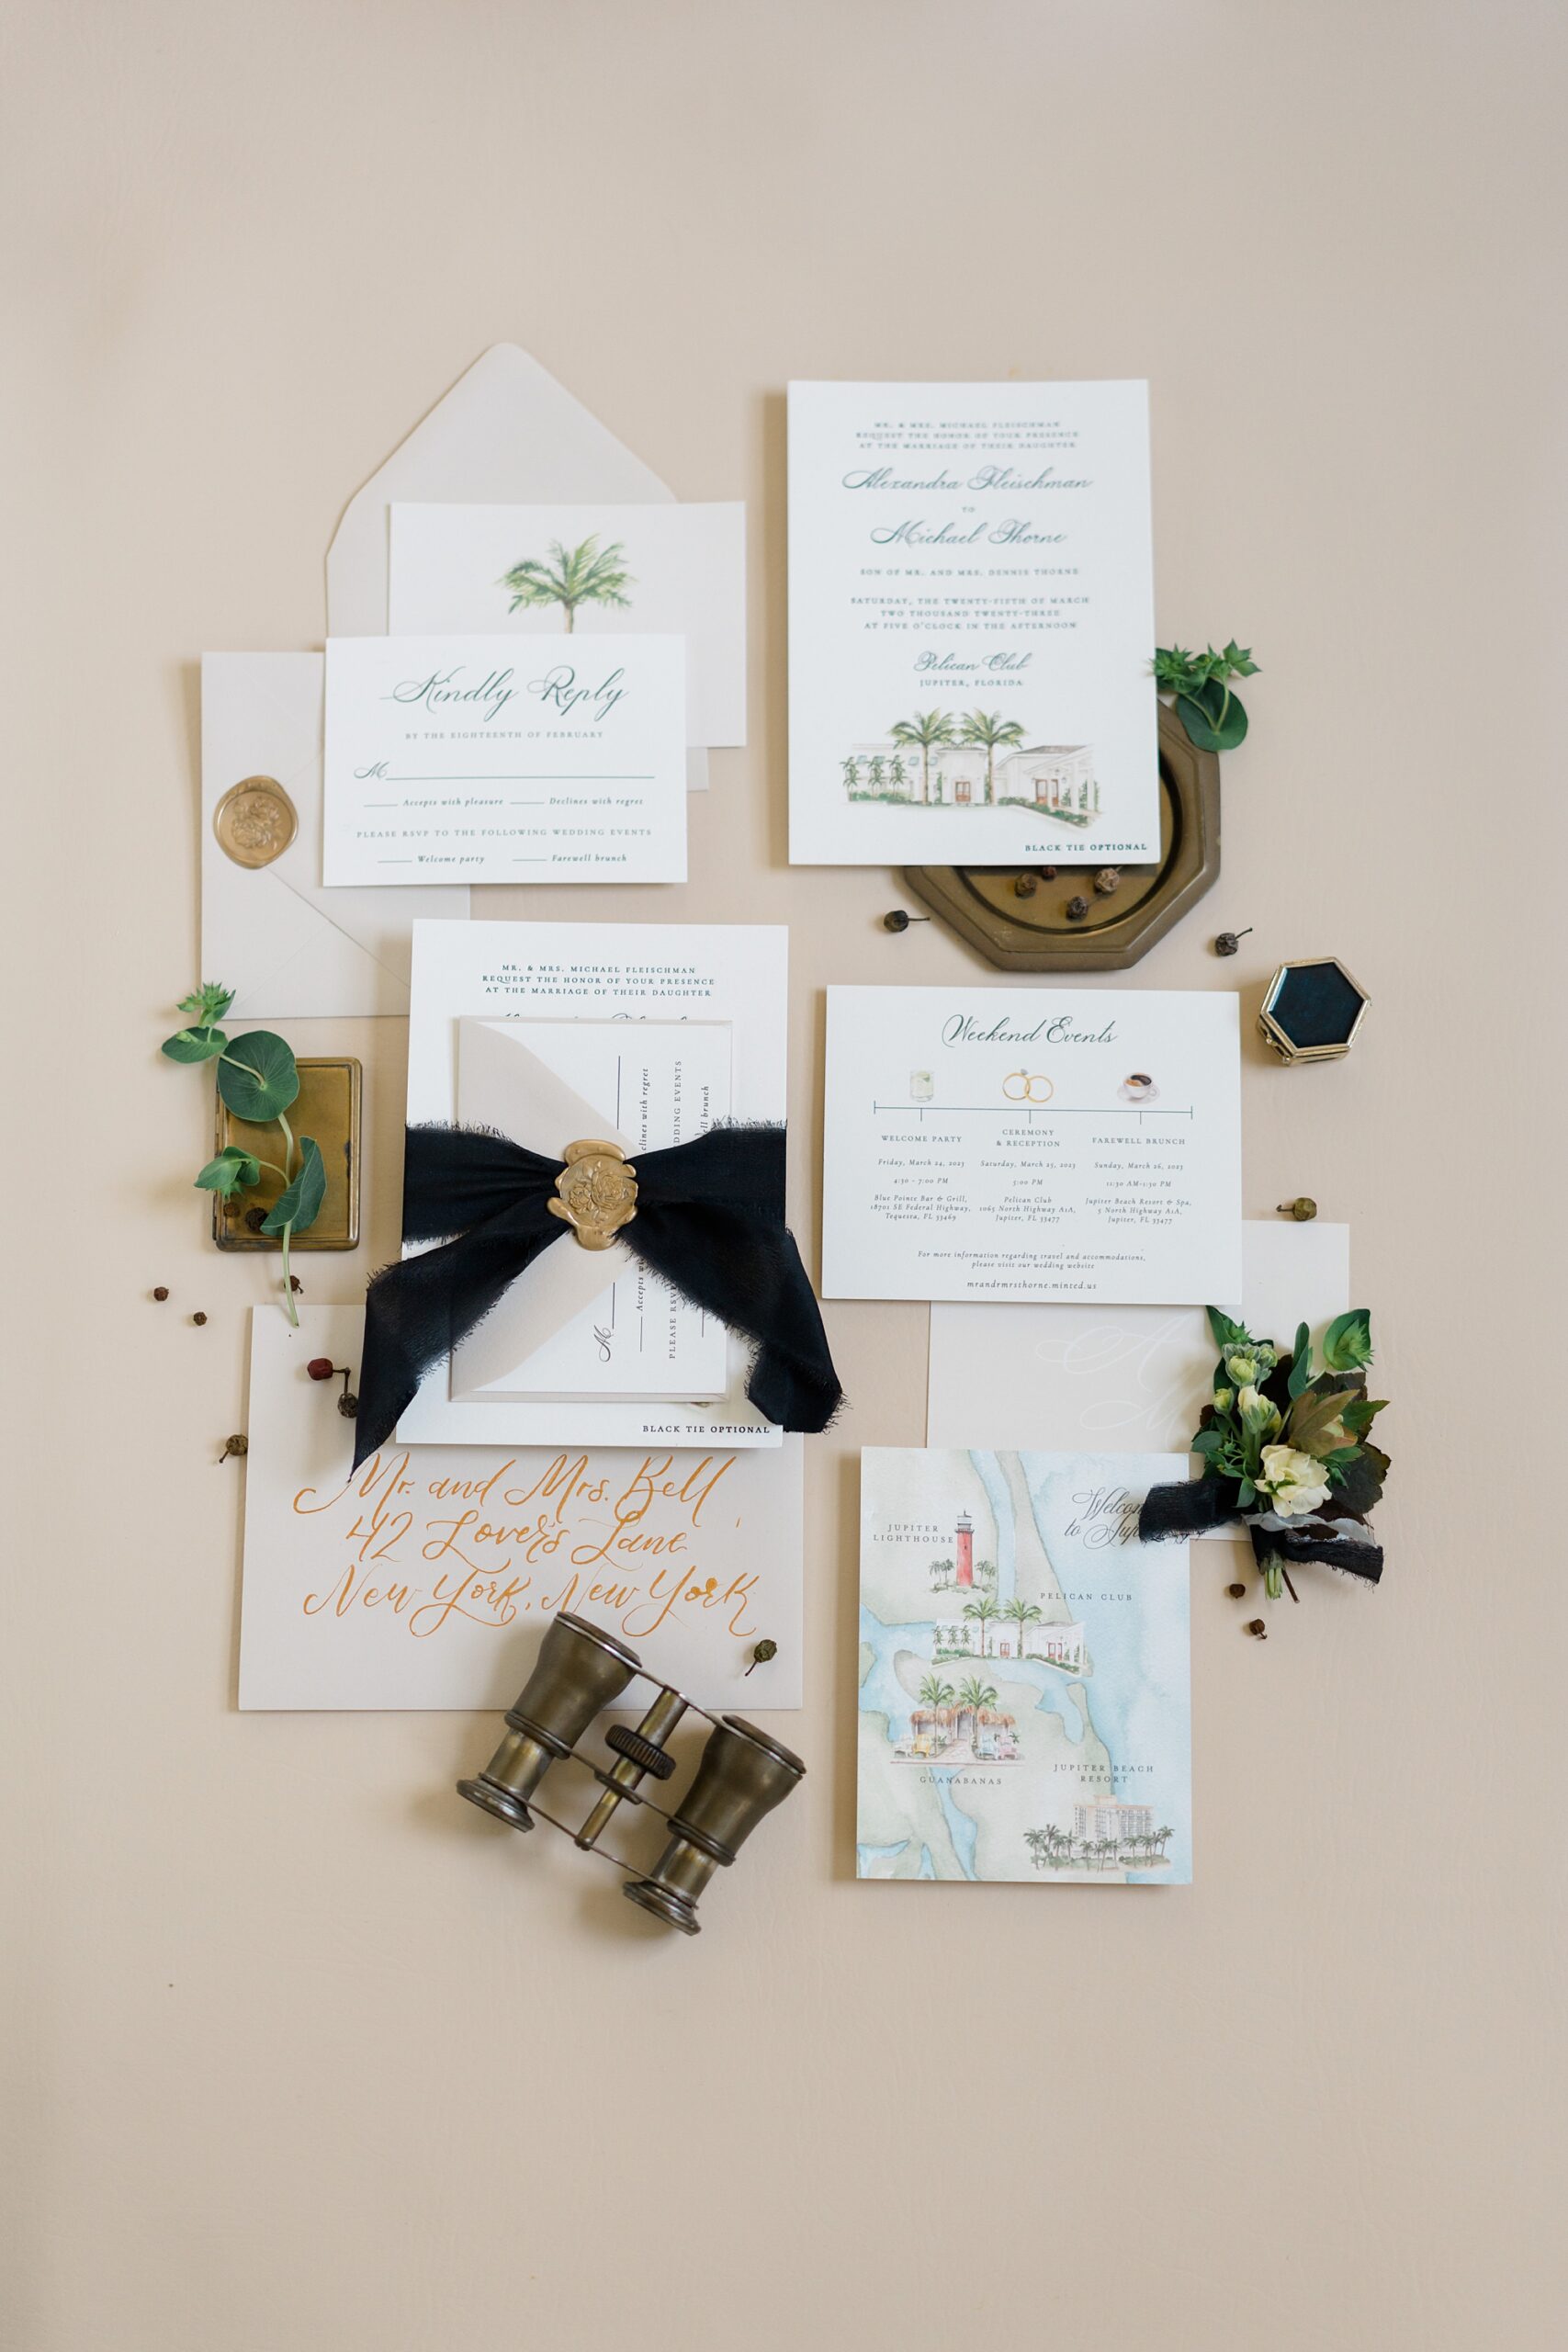 Stunning wedding invitations suite from Raise Your Words Design branding session by Philadelphia branding photographer Amber Dawn